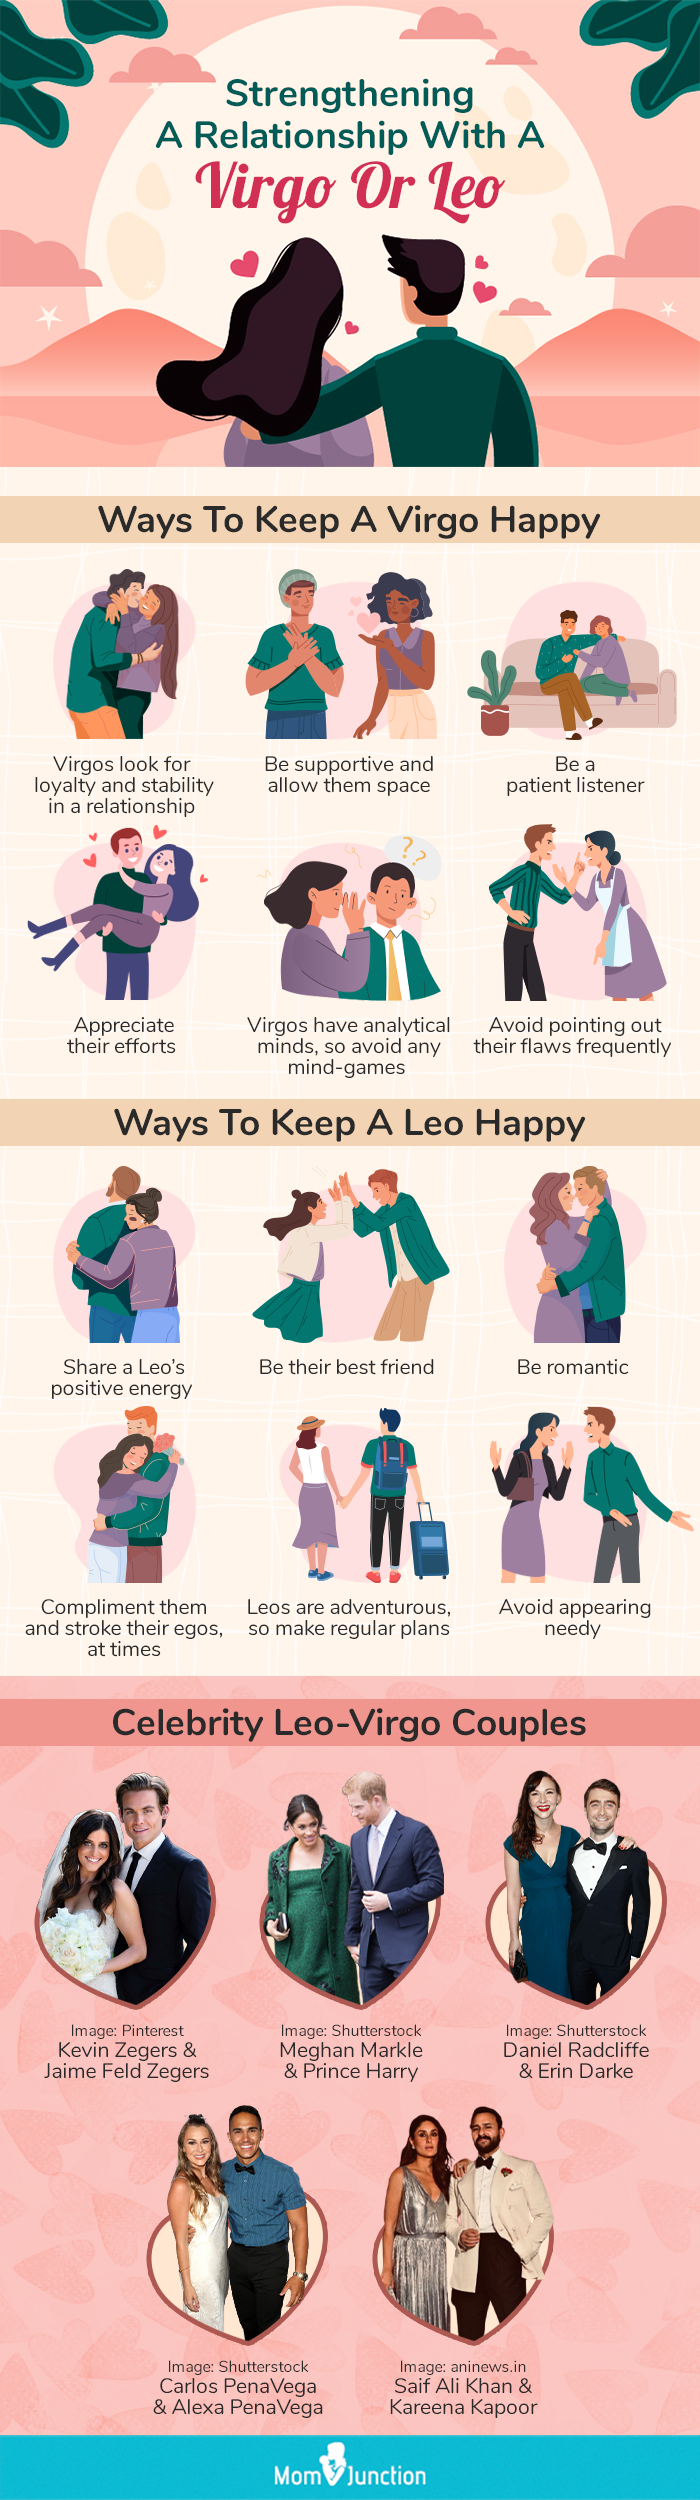 strengthening a relationship with a virgo or leo [infographic]